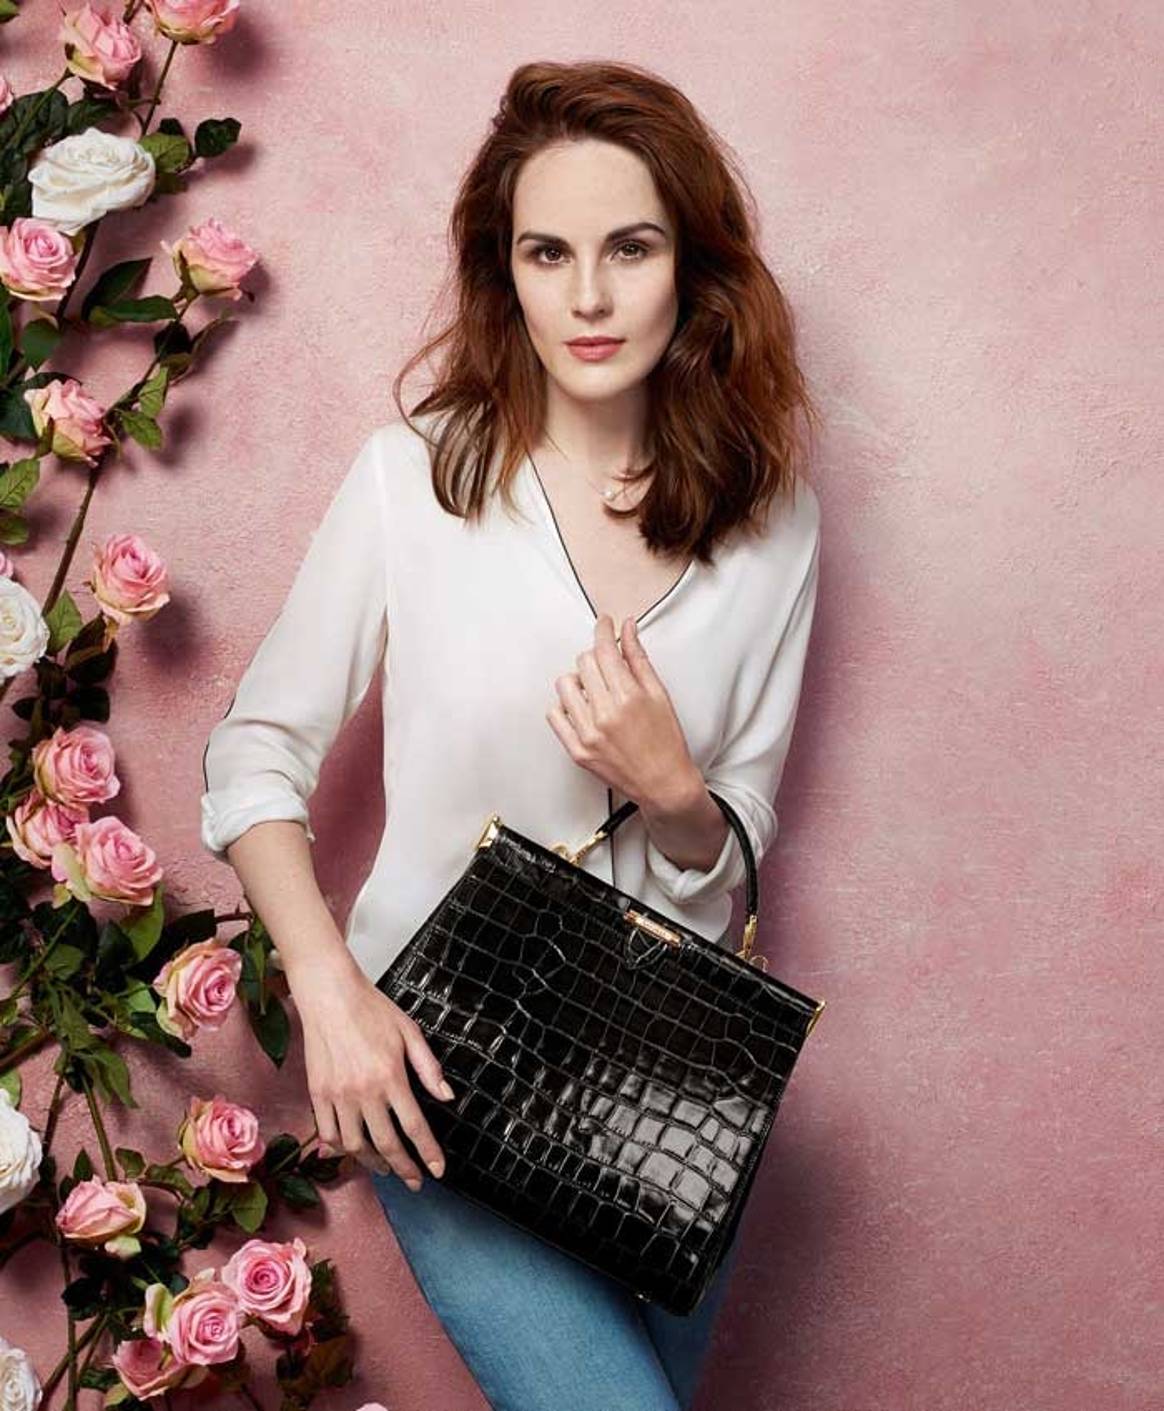 Aspinal of London teams up with Michelle Dockery